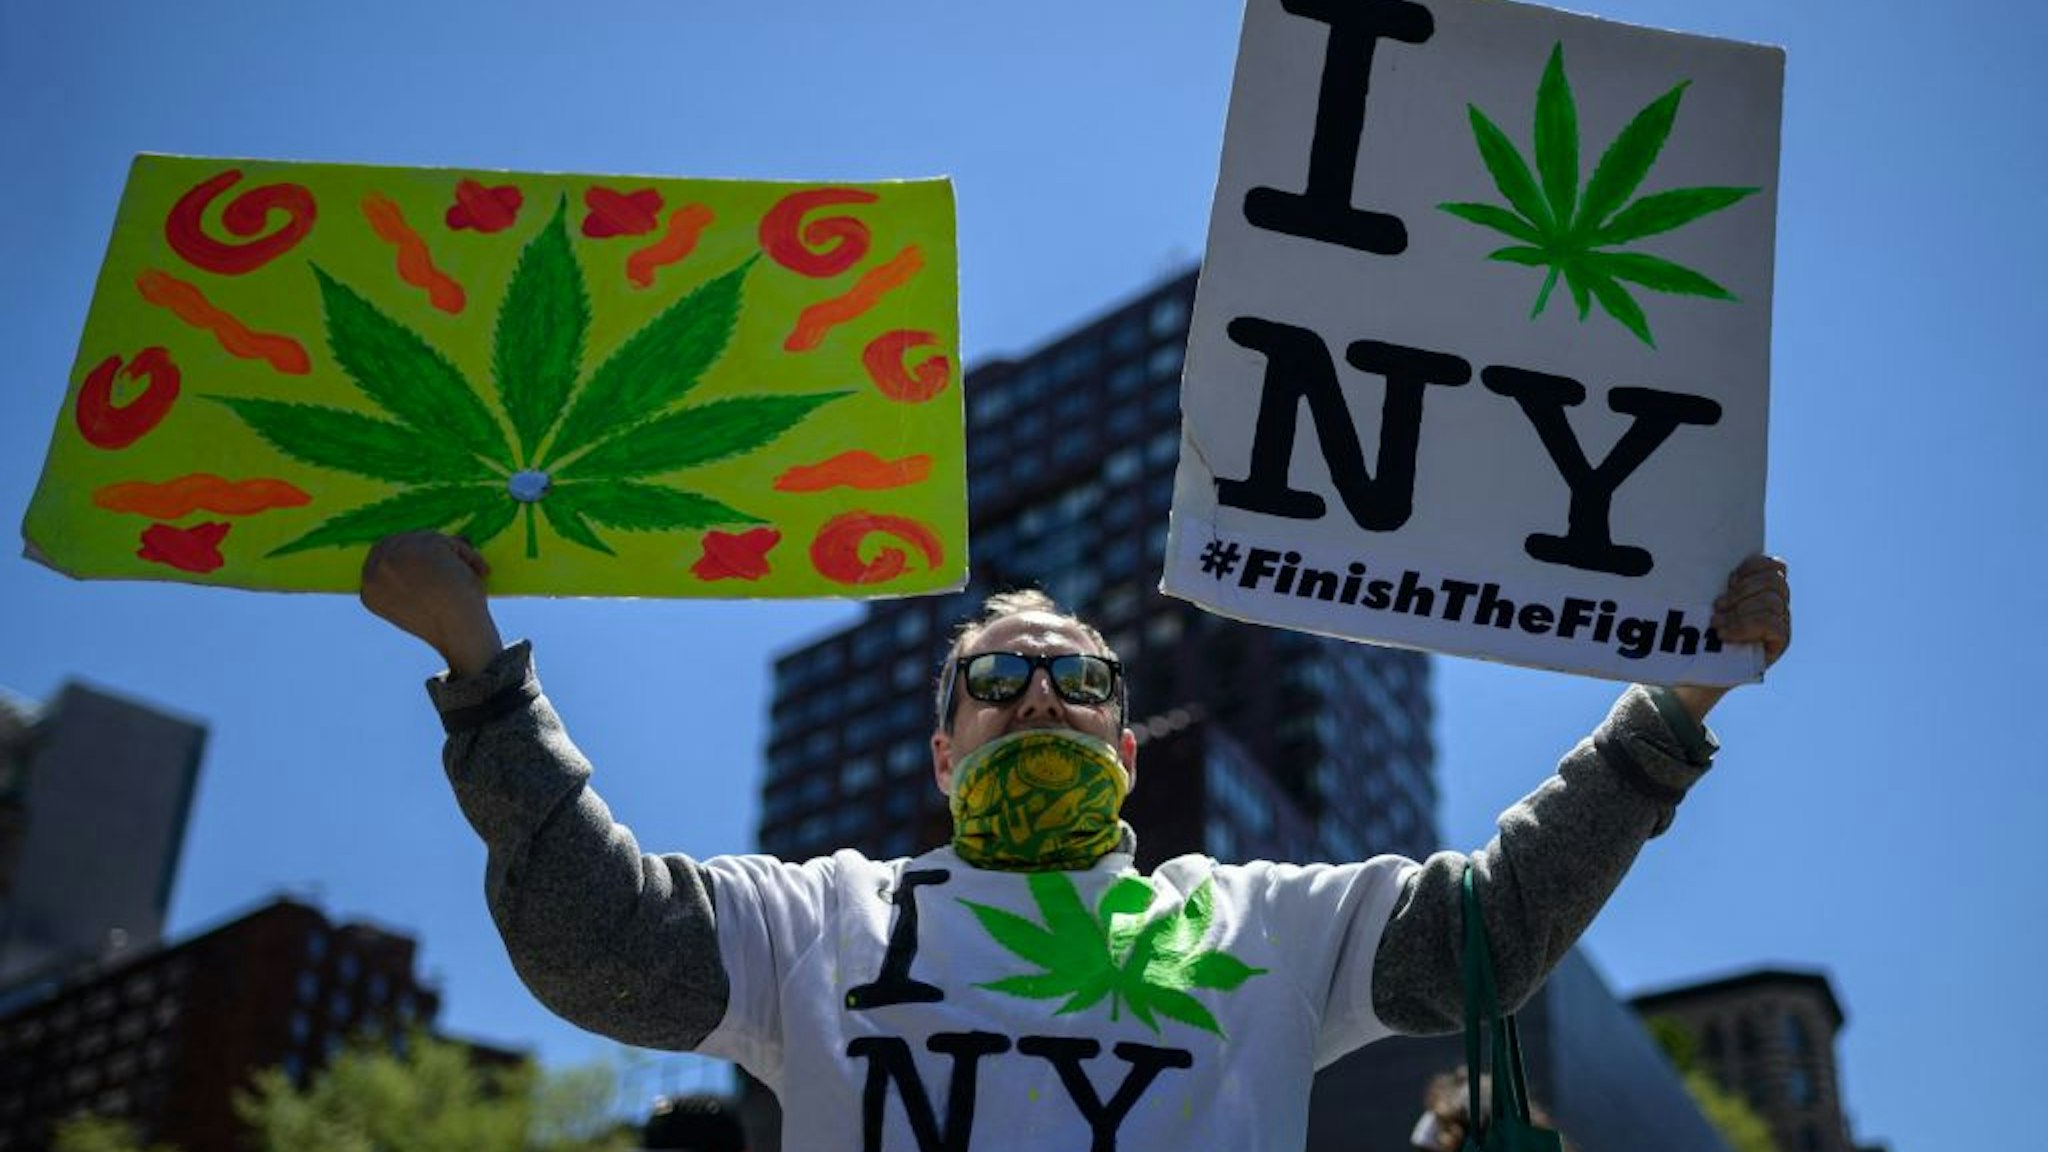 Demonstrators march in the annual NYC Cannabis Parade &amp; Rally in support of the legalization of marijuana for recreational and medical use, on May 1, 2021 in New York City. - New York Governor Andrew Cuomo signed legislation legalizing recreational marijuana on March 31, 2021, with a large chunk of tax revenues from sales set to go to minority communities. (Photo by Angela Weiss / AFP) (Photo by ANGELA WEISS/AFP via Getty Images)